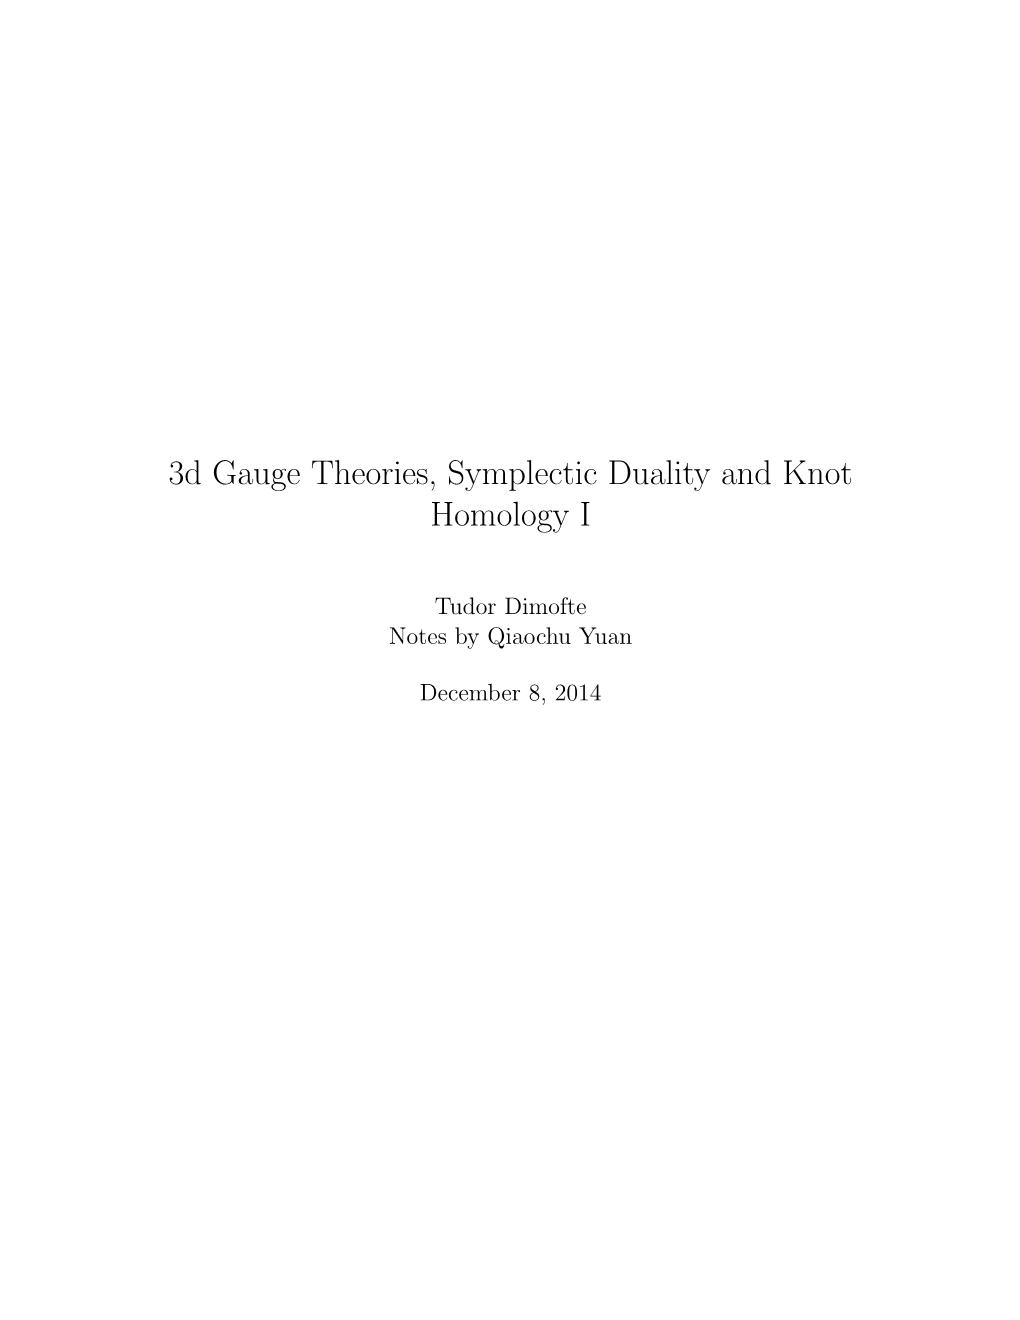 3D Gauge Theories, Symplectic Duality and Knot Homology I